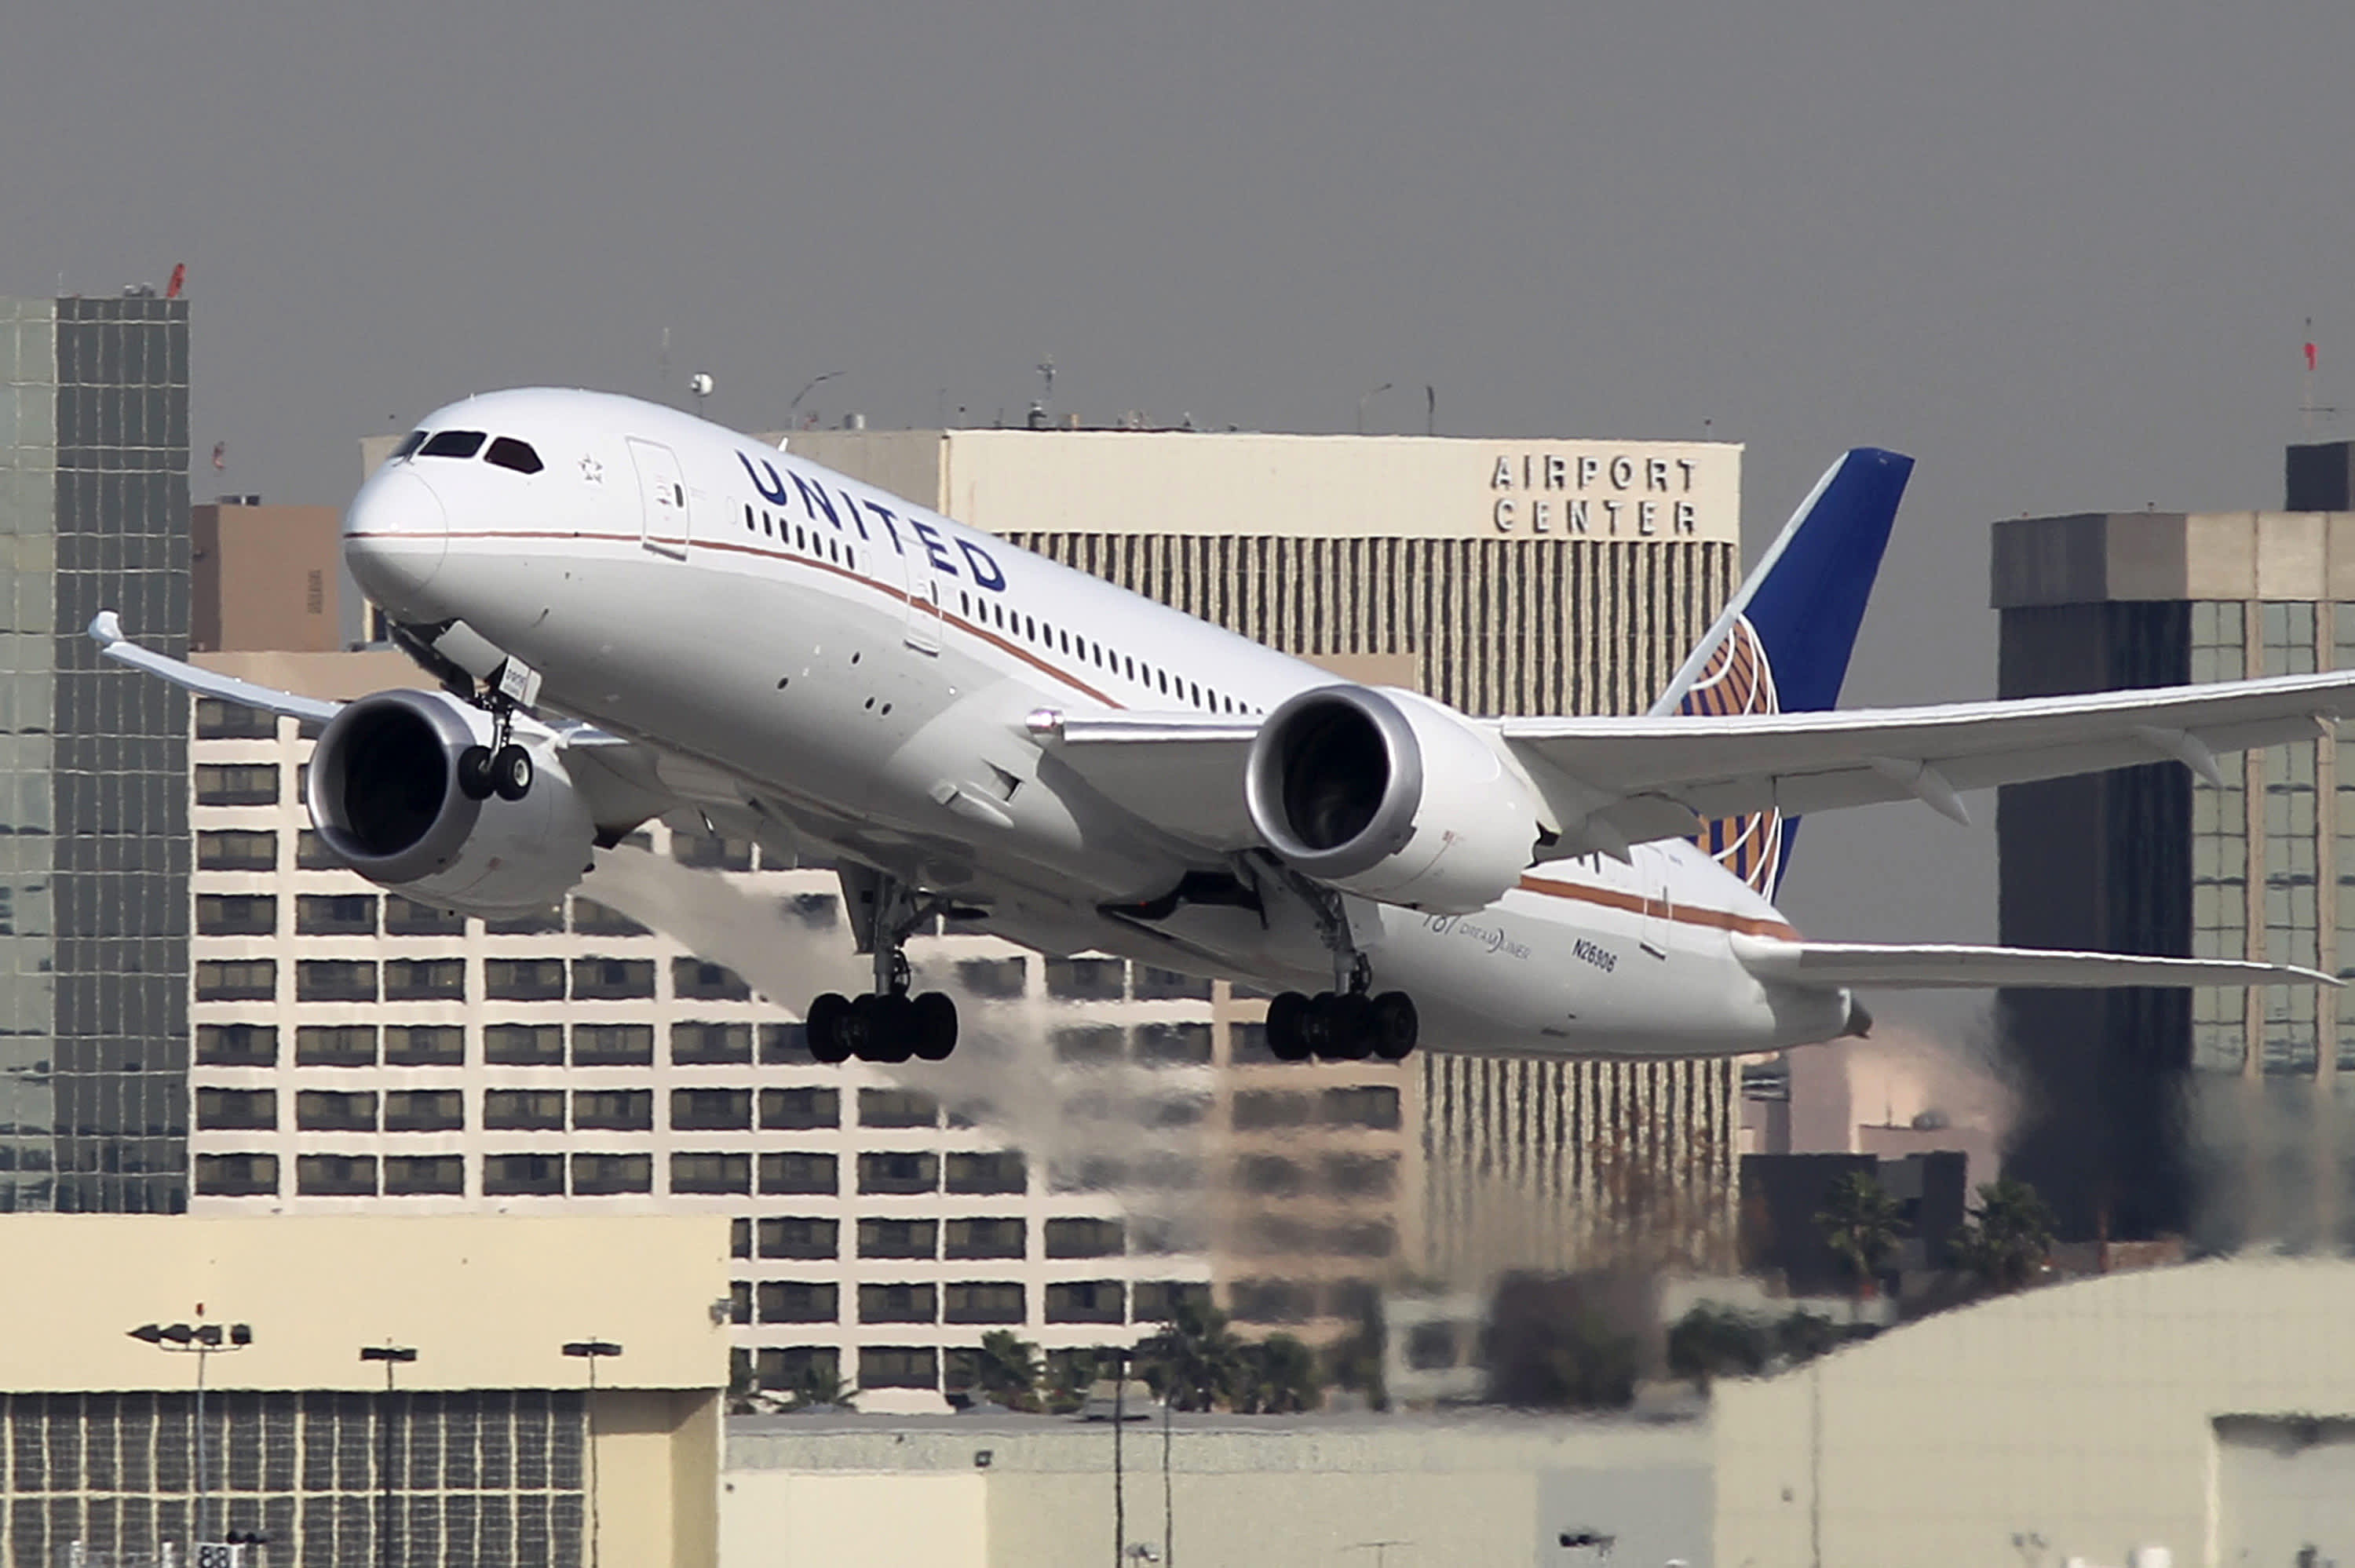 United's losses mount but airline expects to surpass 2019 margins in 2023